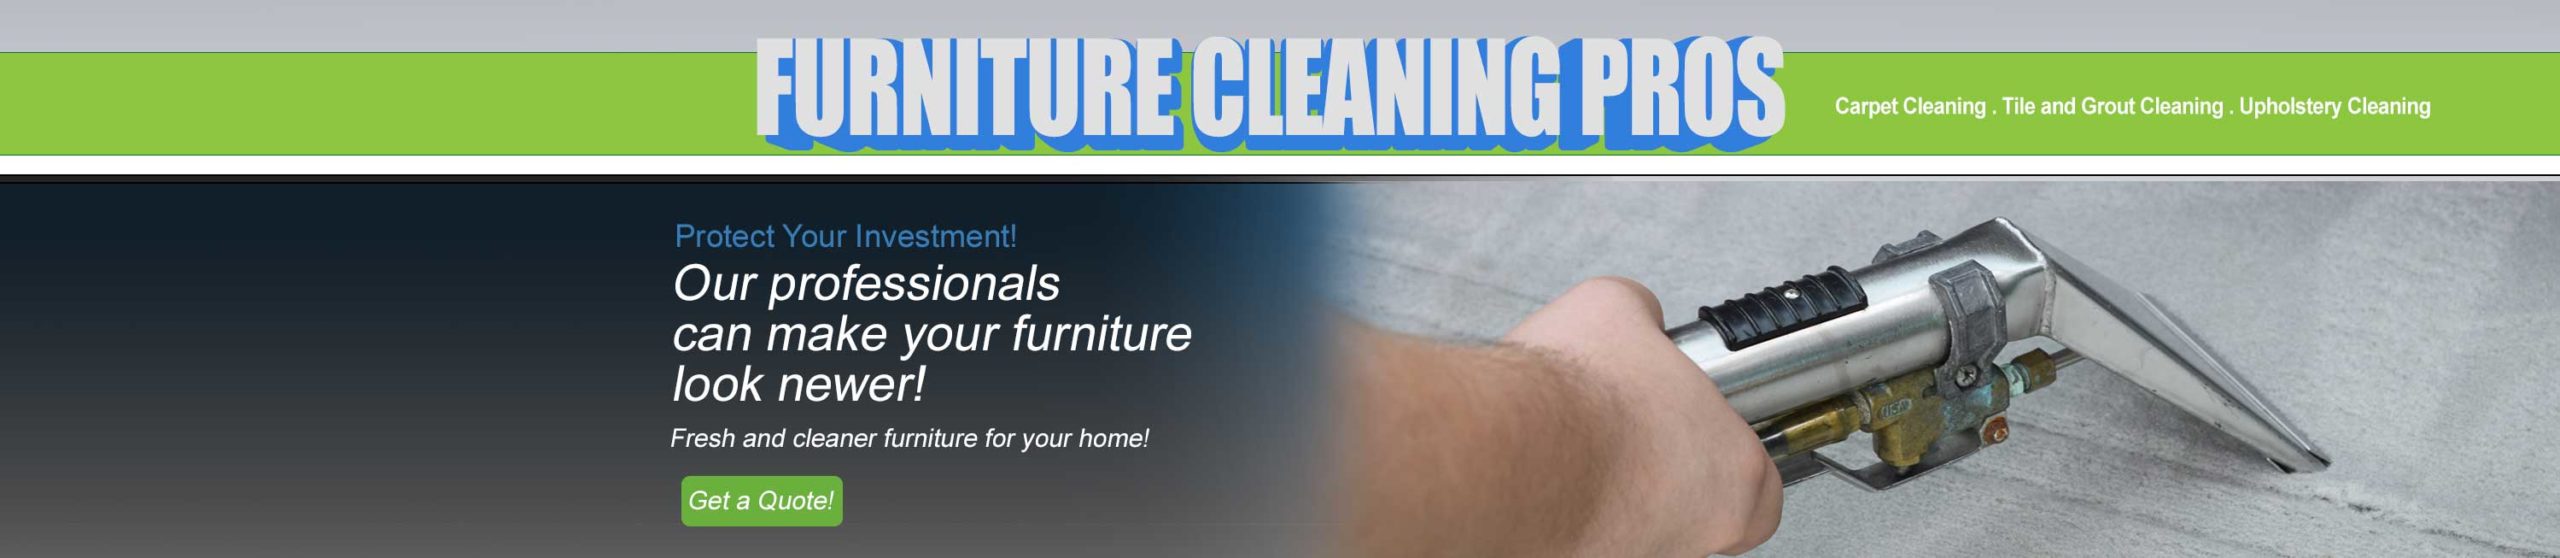 Furniture and upholstery cleaning in Eloy AZ